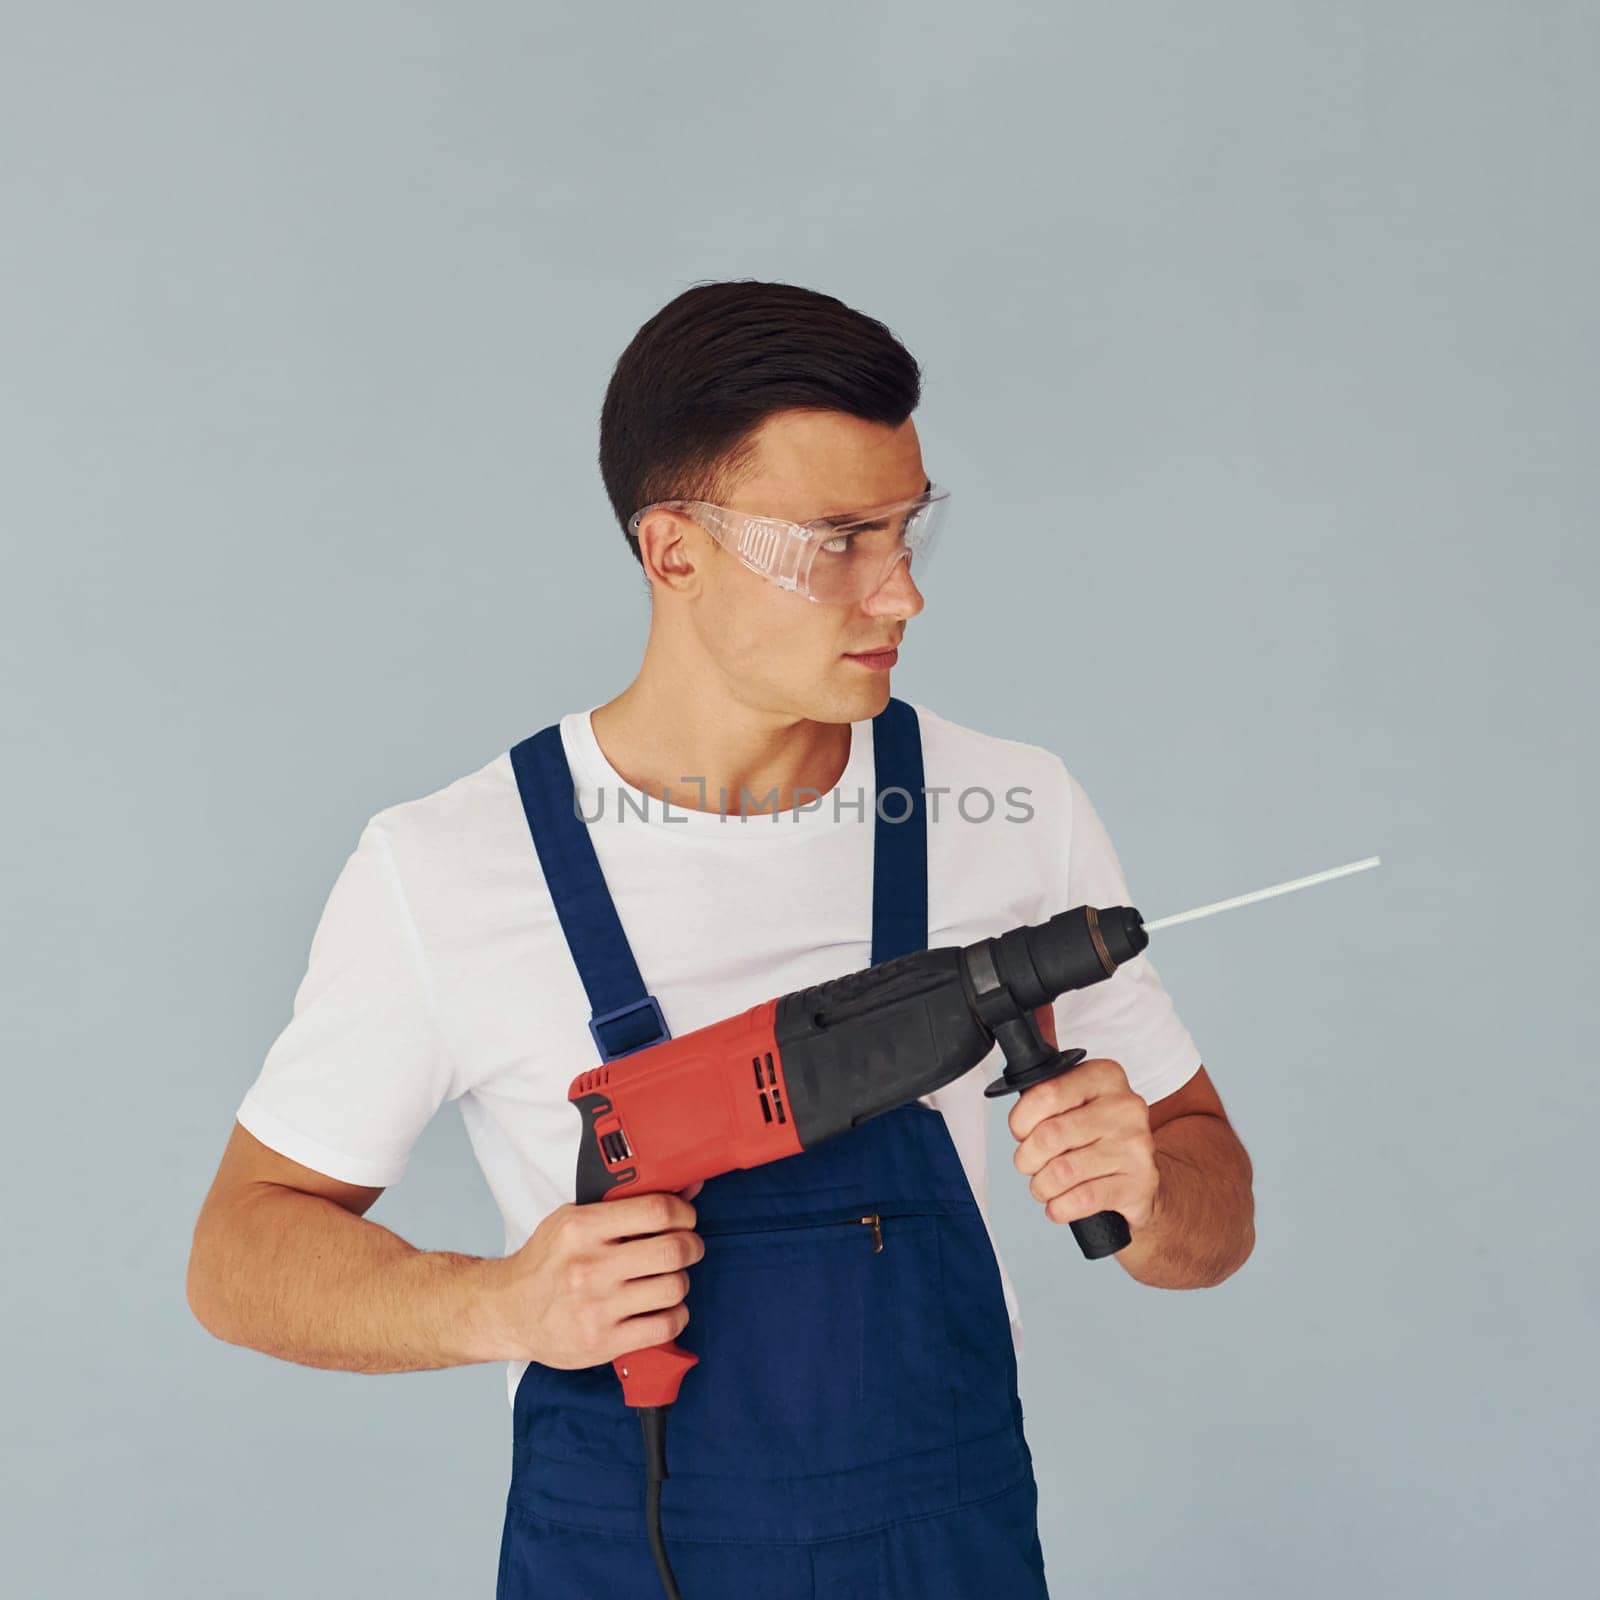 In protective eyewear and with drill in hands. Male worker in blue uniform standing inside of studio against white background by Standret